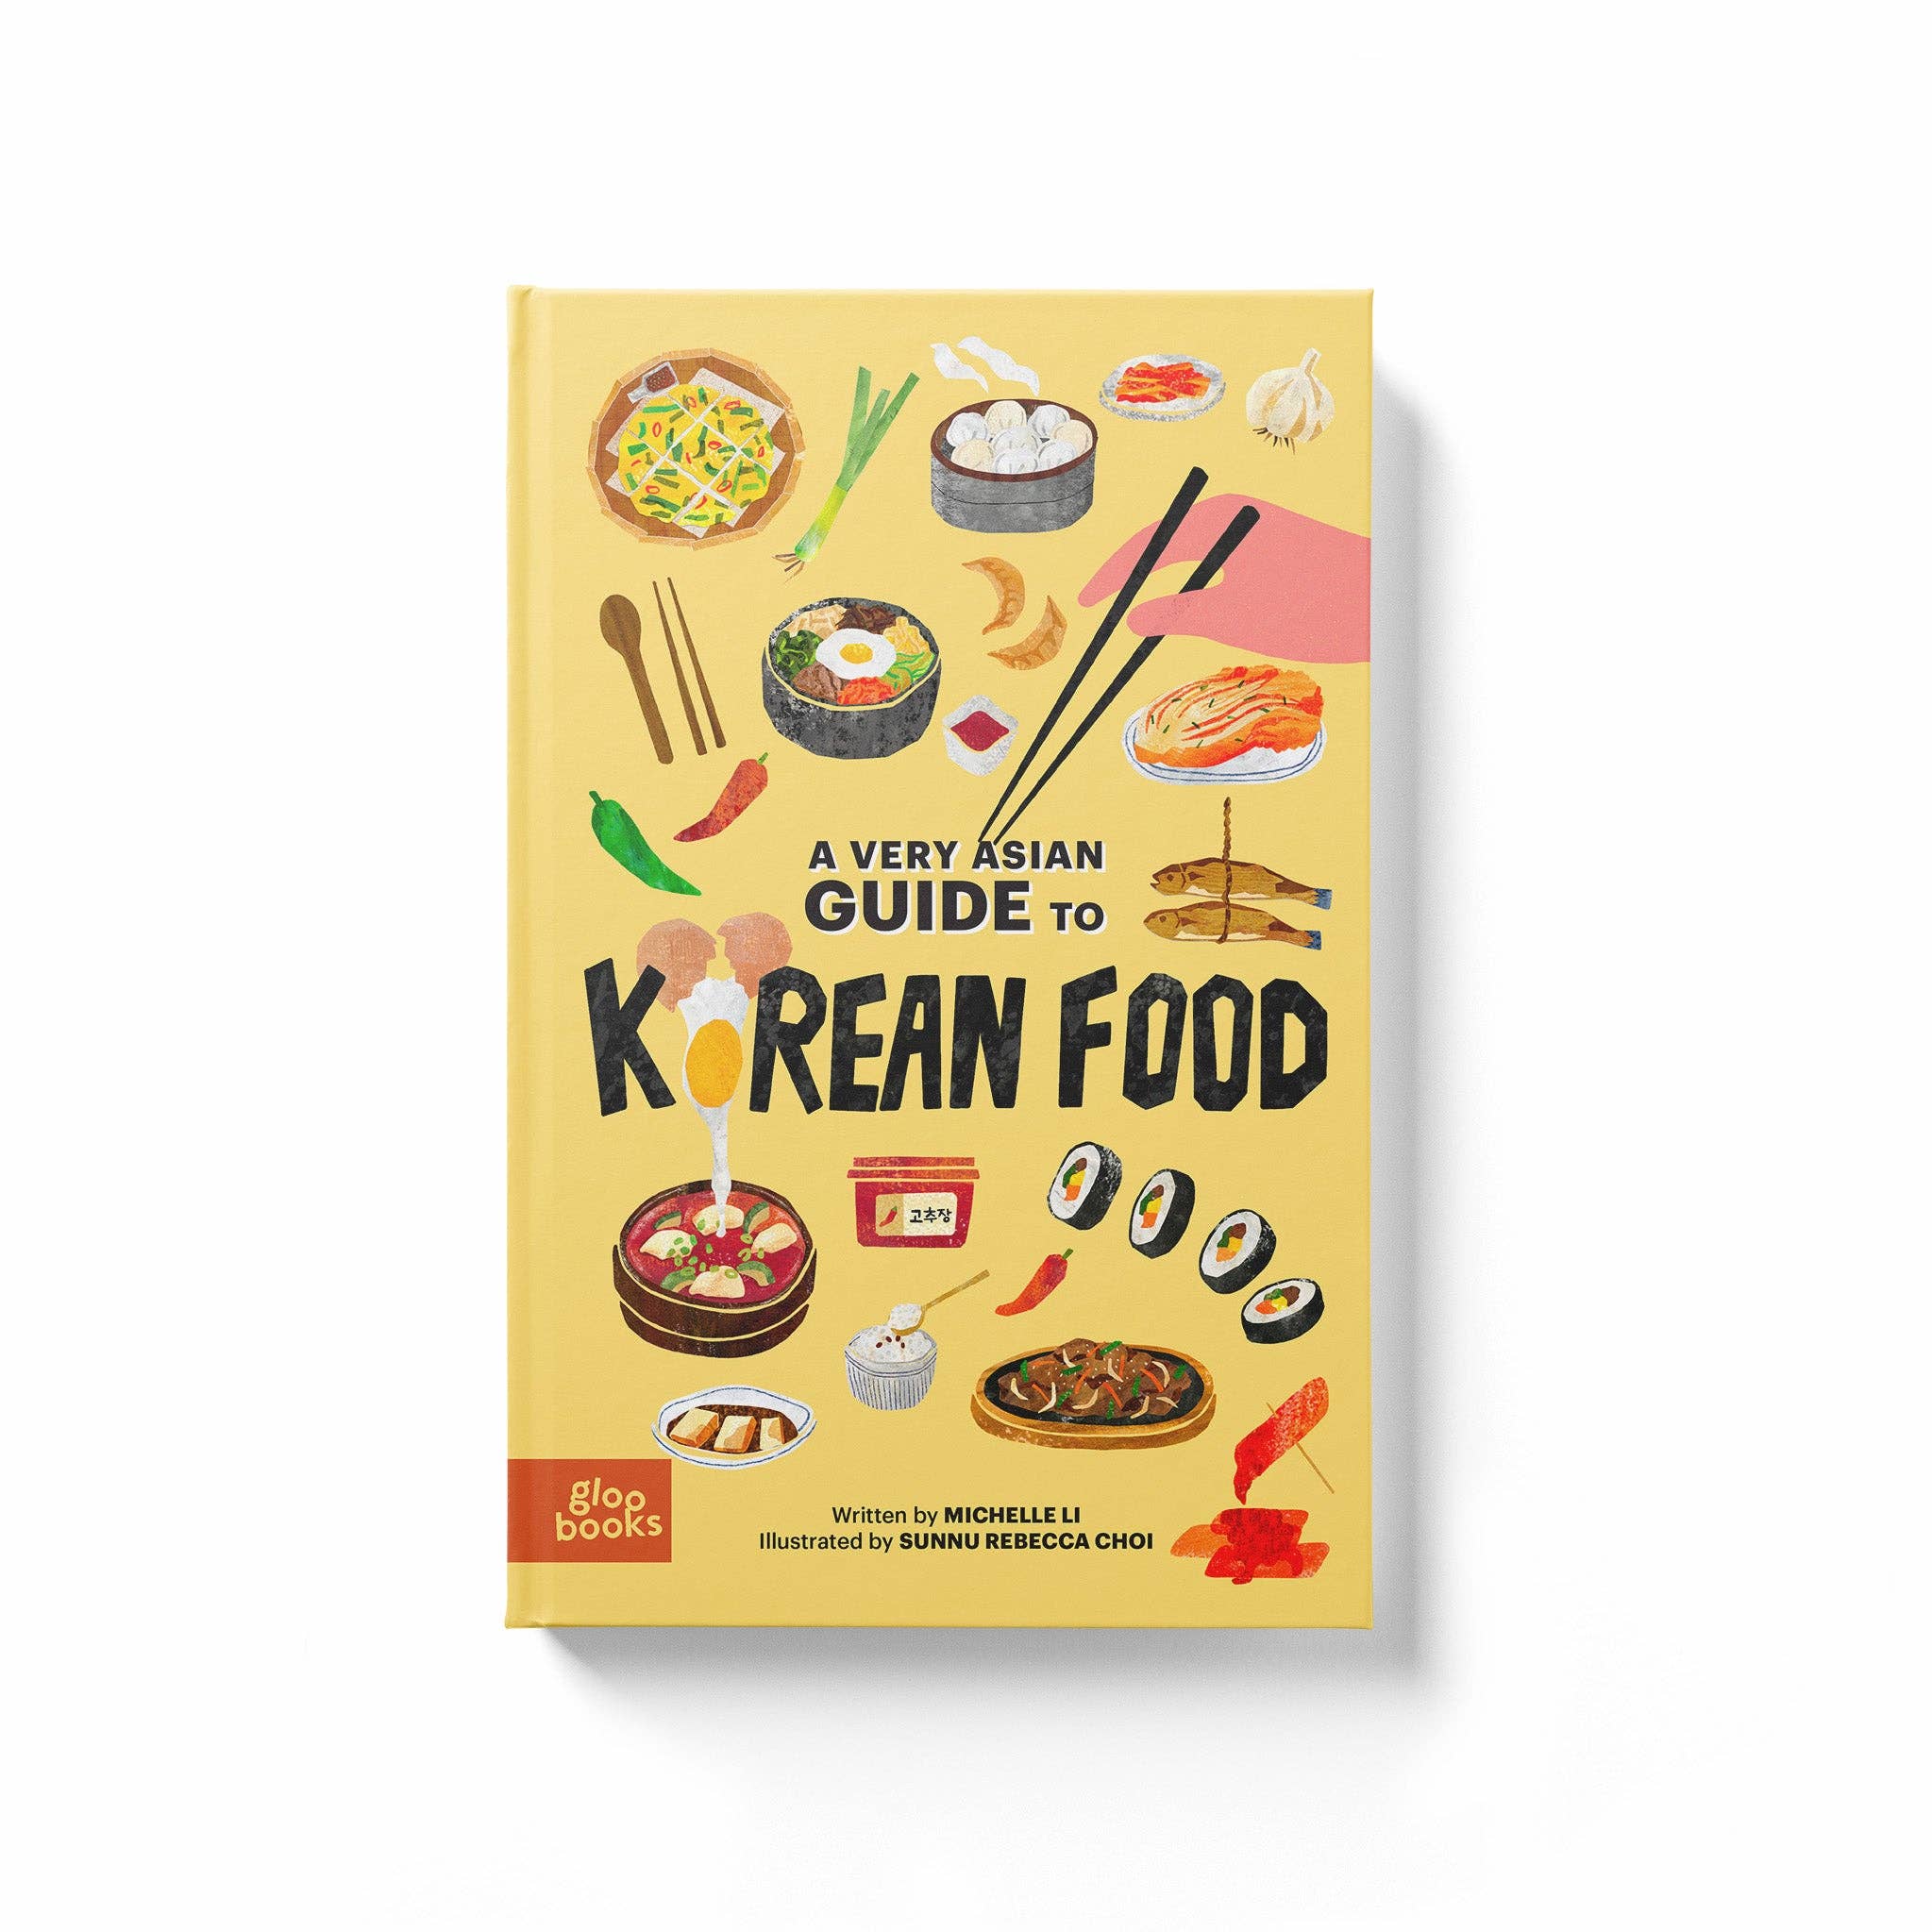 A Very Asian Guide to Korean Food